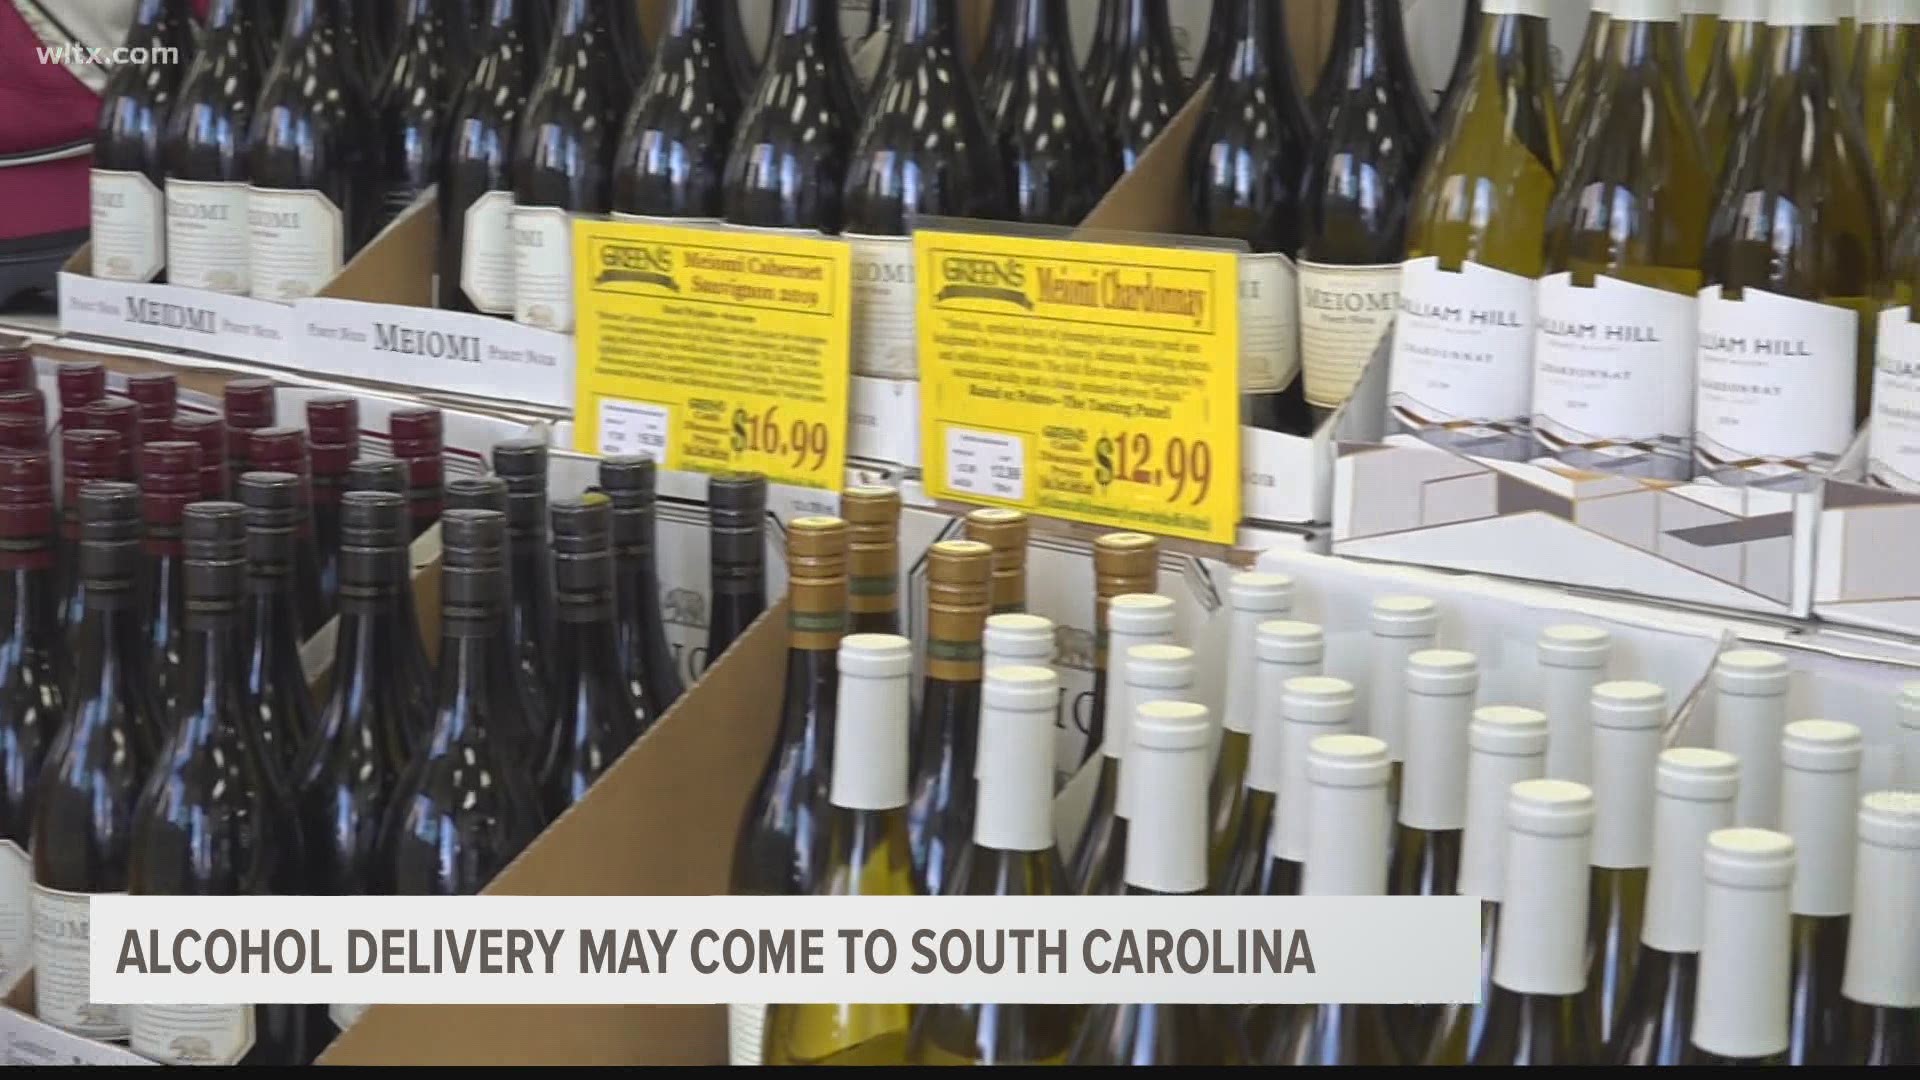 A bill introduced by state lawmakers could allow people to have beer or wine delivered to their homes.